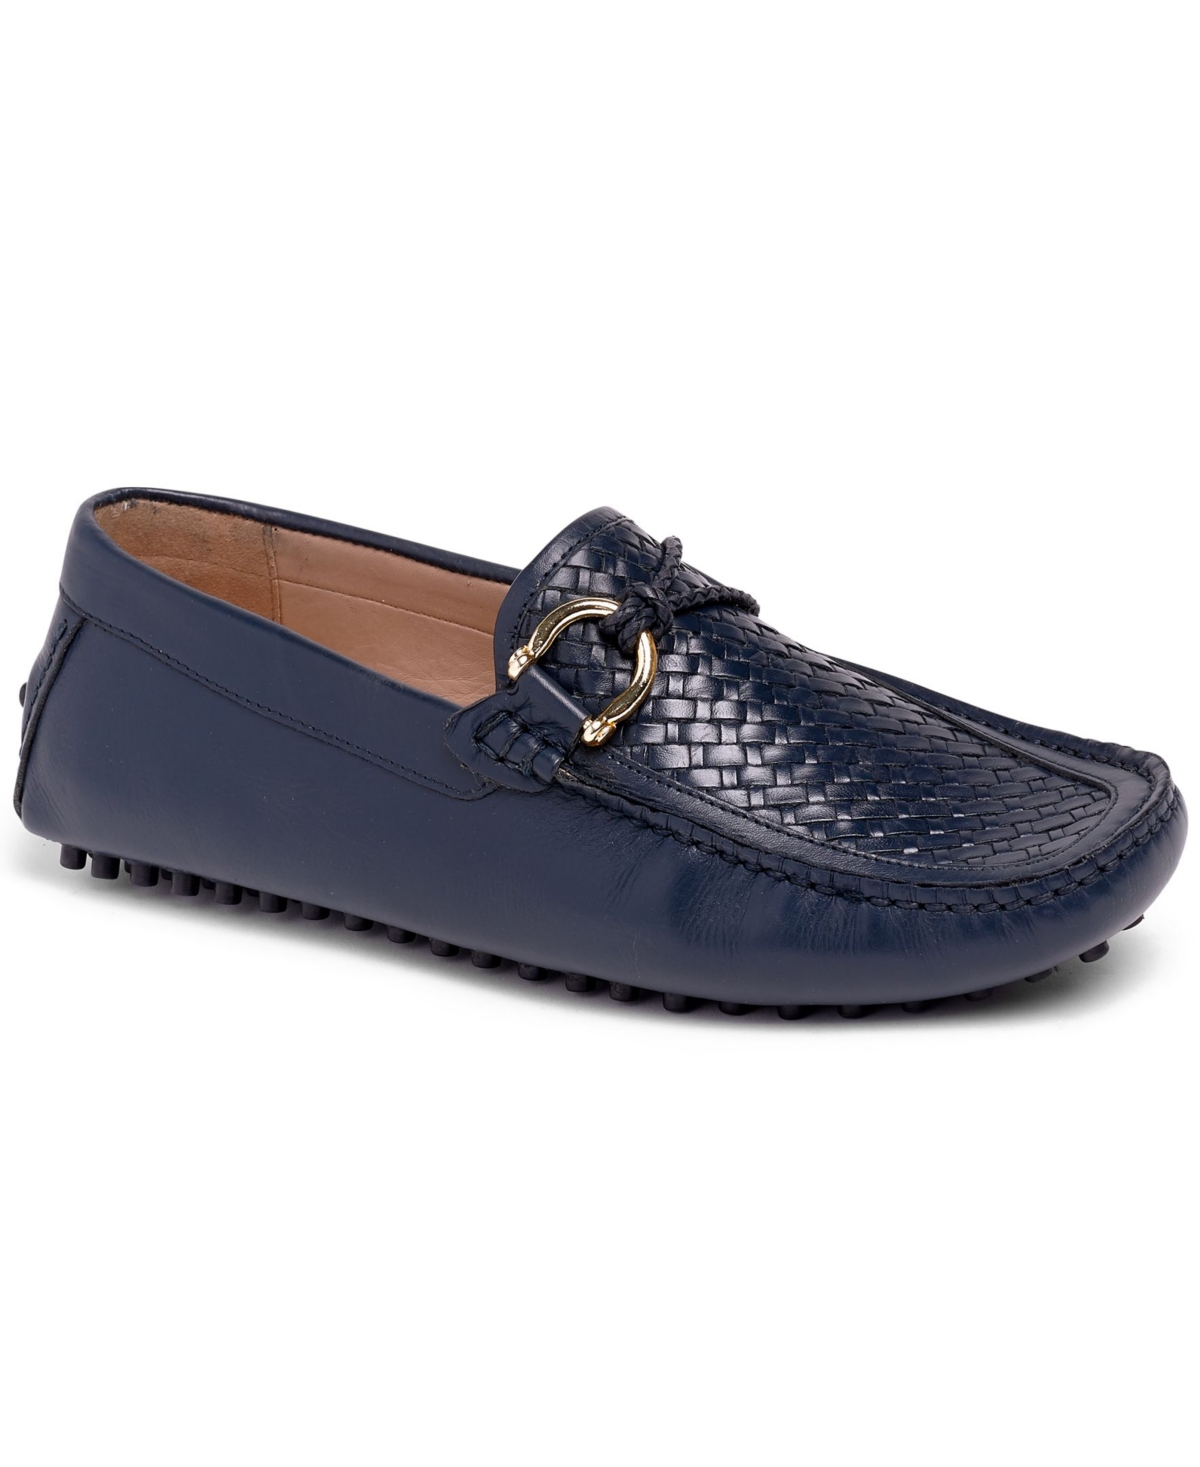 Carlos By Carlos Santana Men's Malone Interweave Driver Leather Loafer Slip-On Casual Shoe Men's Shoes